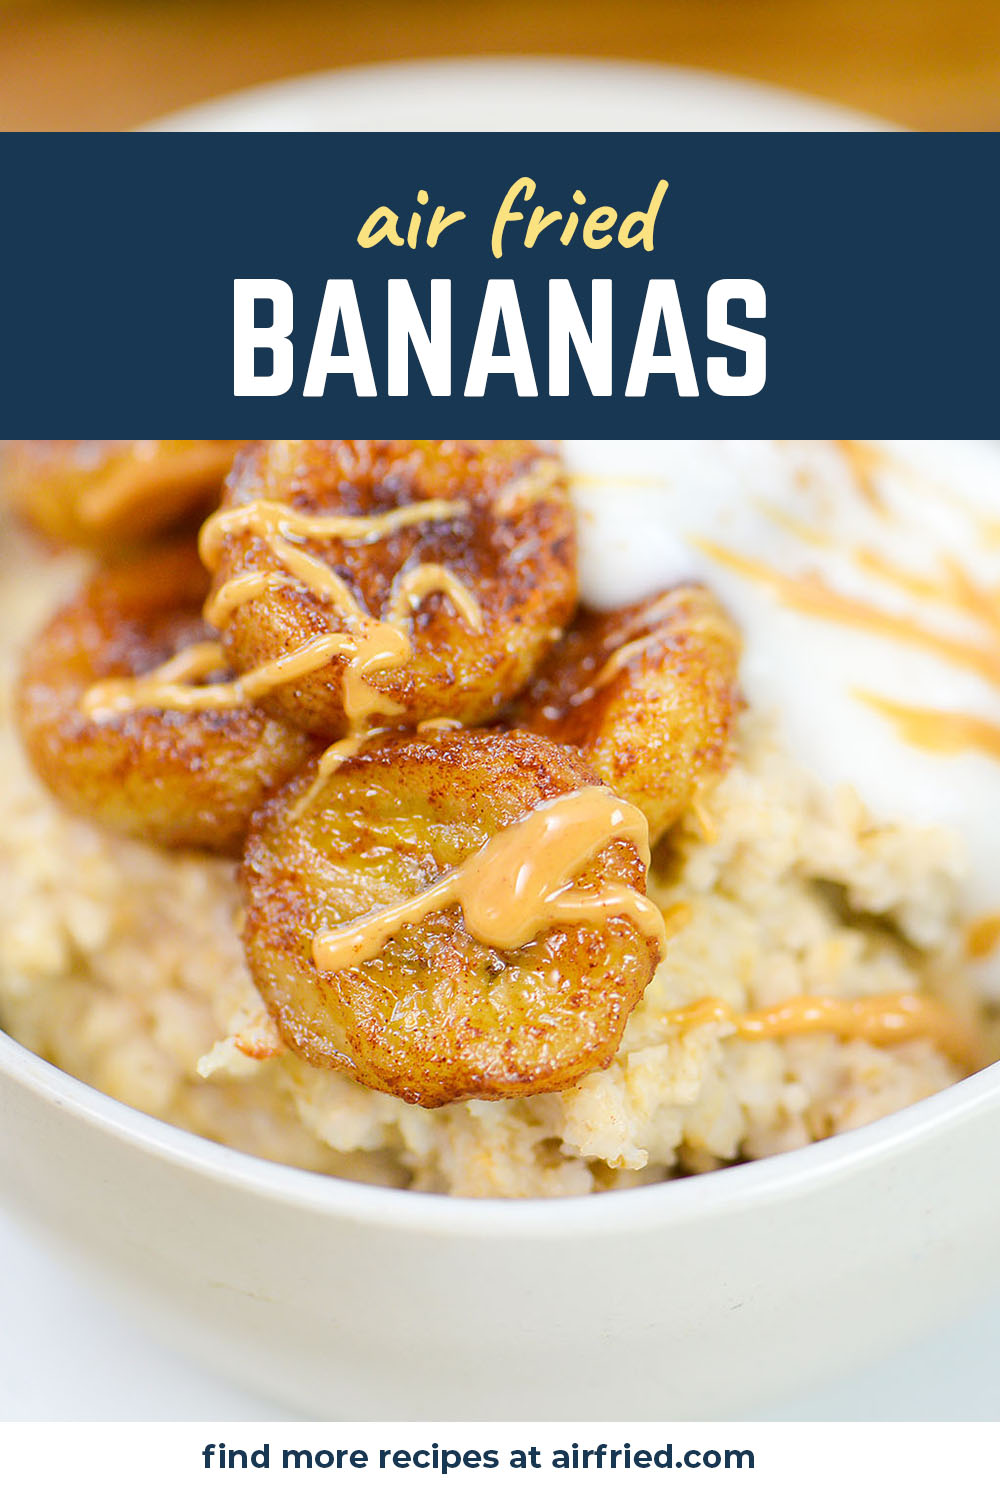 These air fryer bananas are a wonderful, sweet addition to any dessert dish!